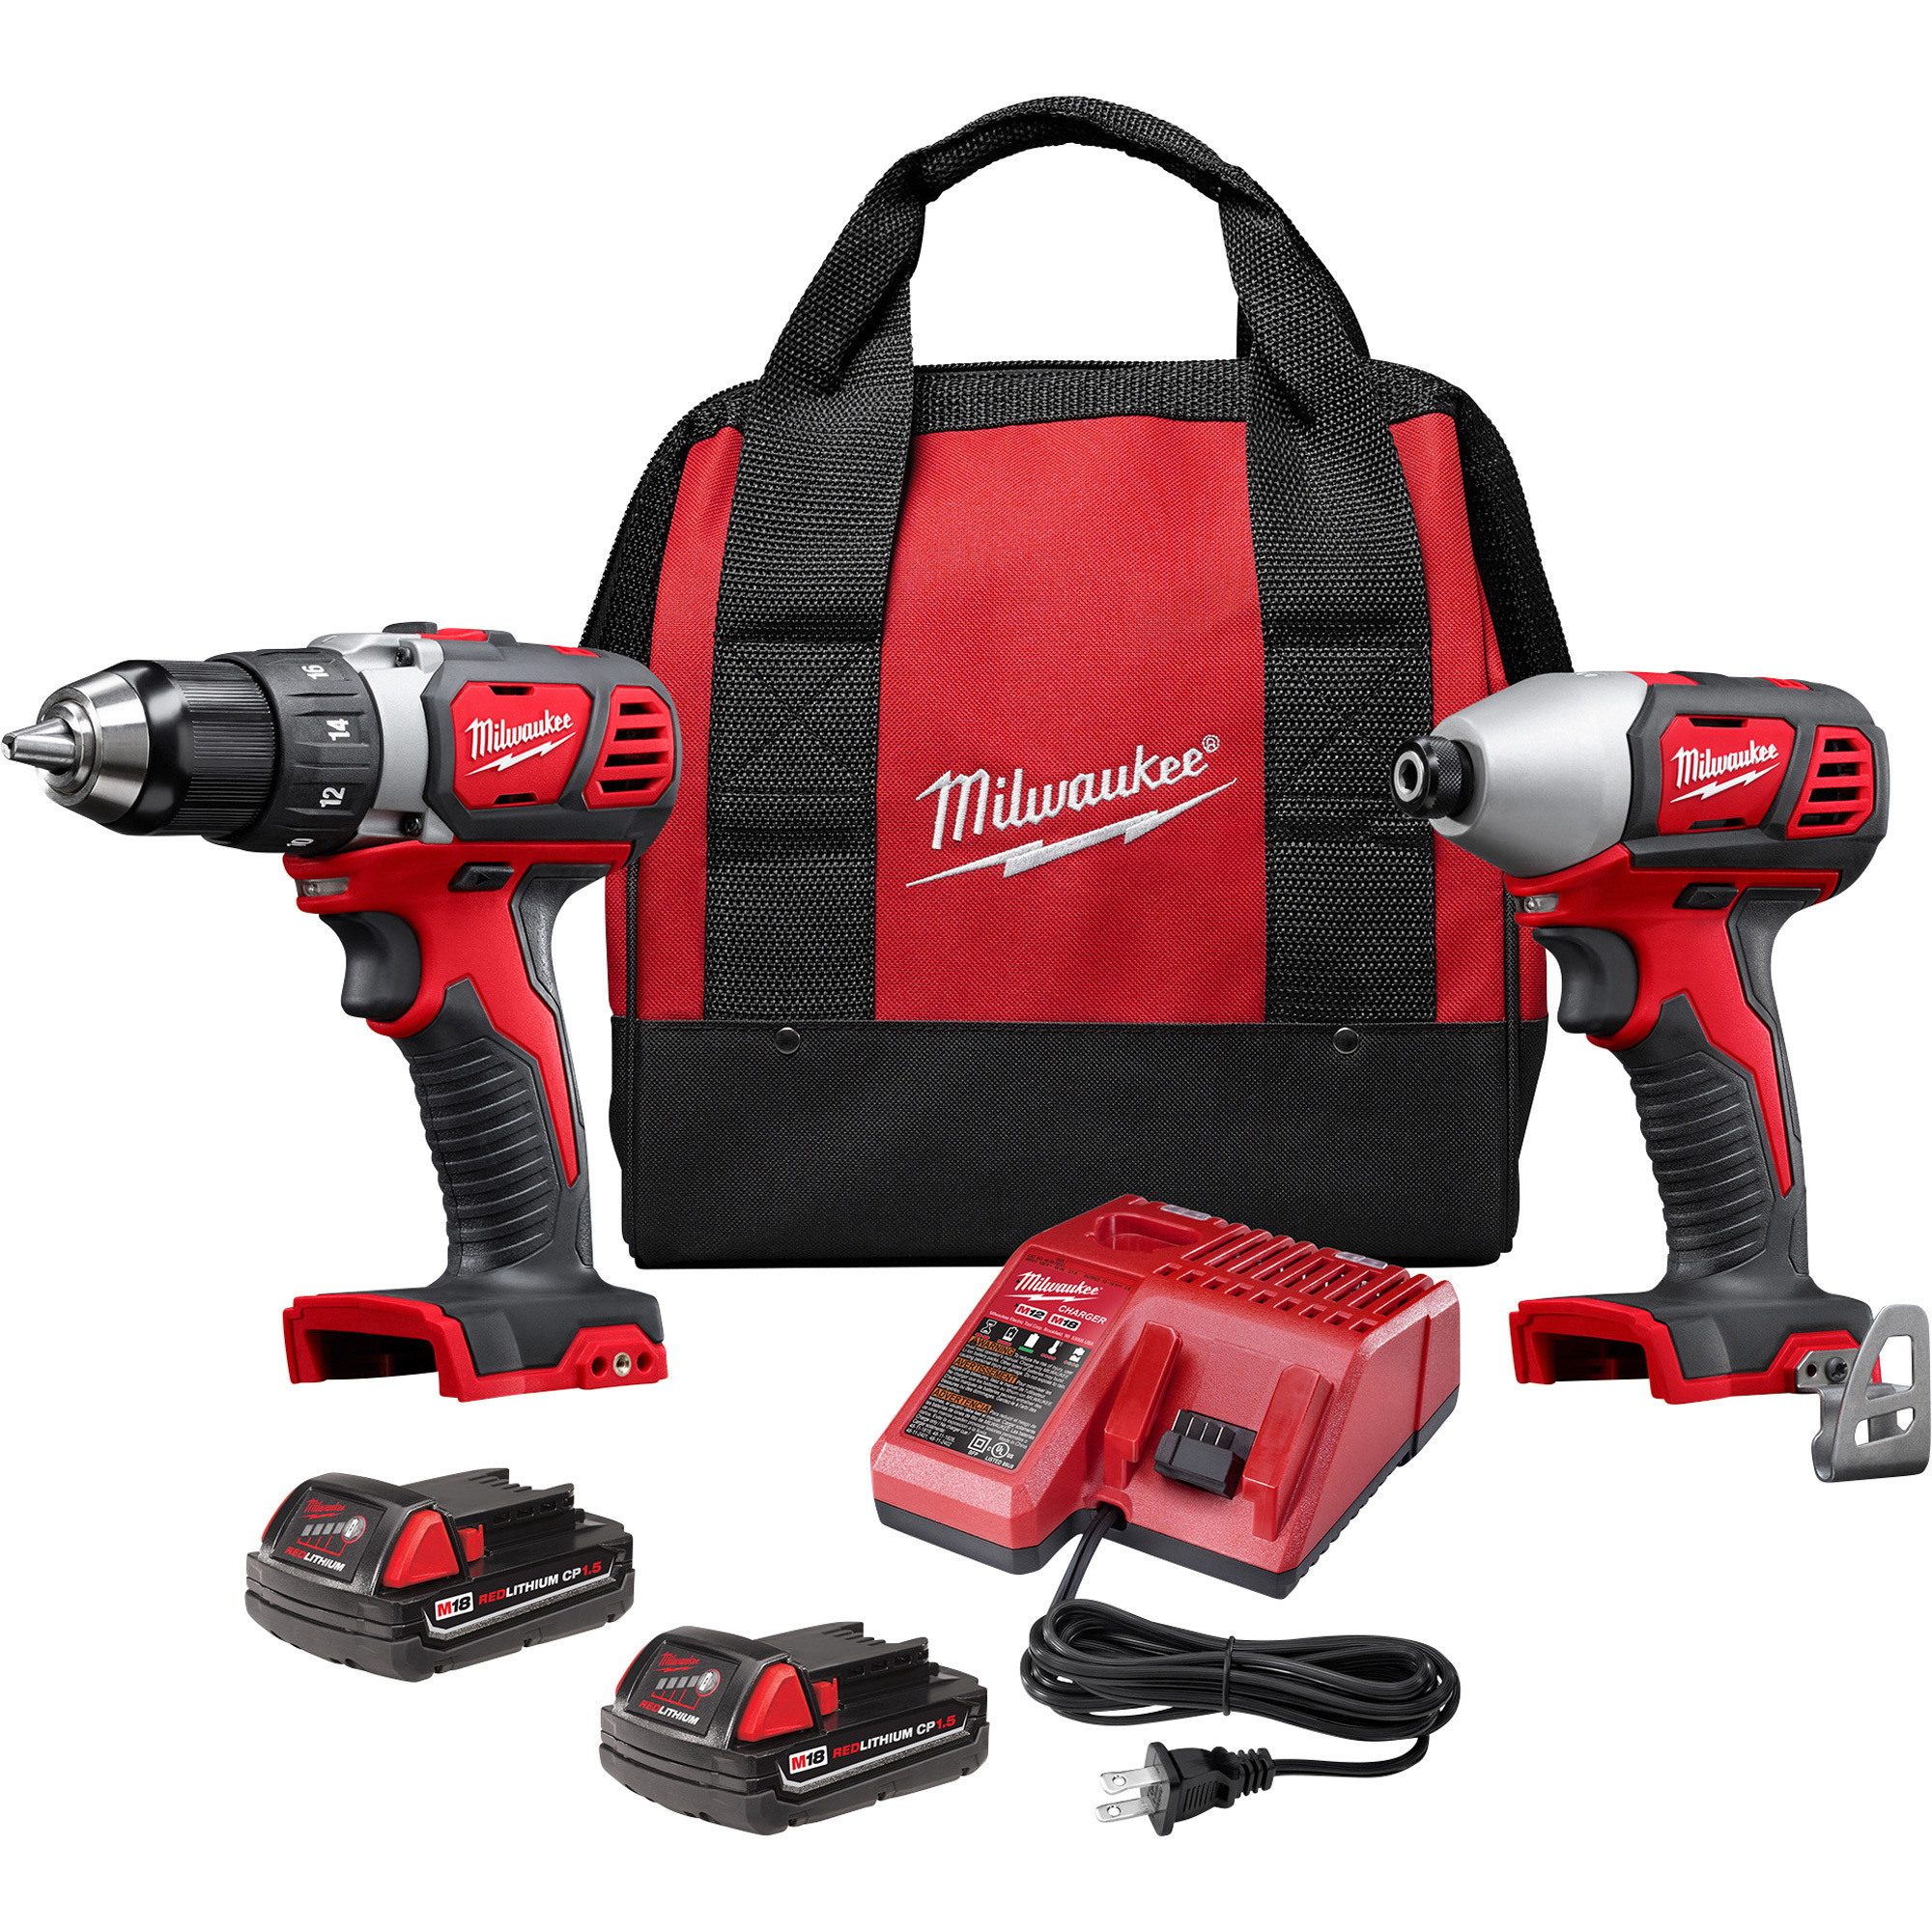 Milwaukee M18 Lithium-Ion Compact Cordless Power Tool Set, 1/2Inch Drill/Driver & 1/4Inch Hex Impact Driver, 2 Batteries, Model 2691-22